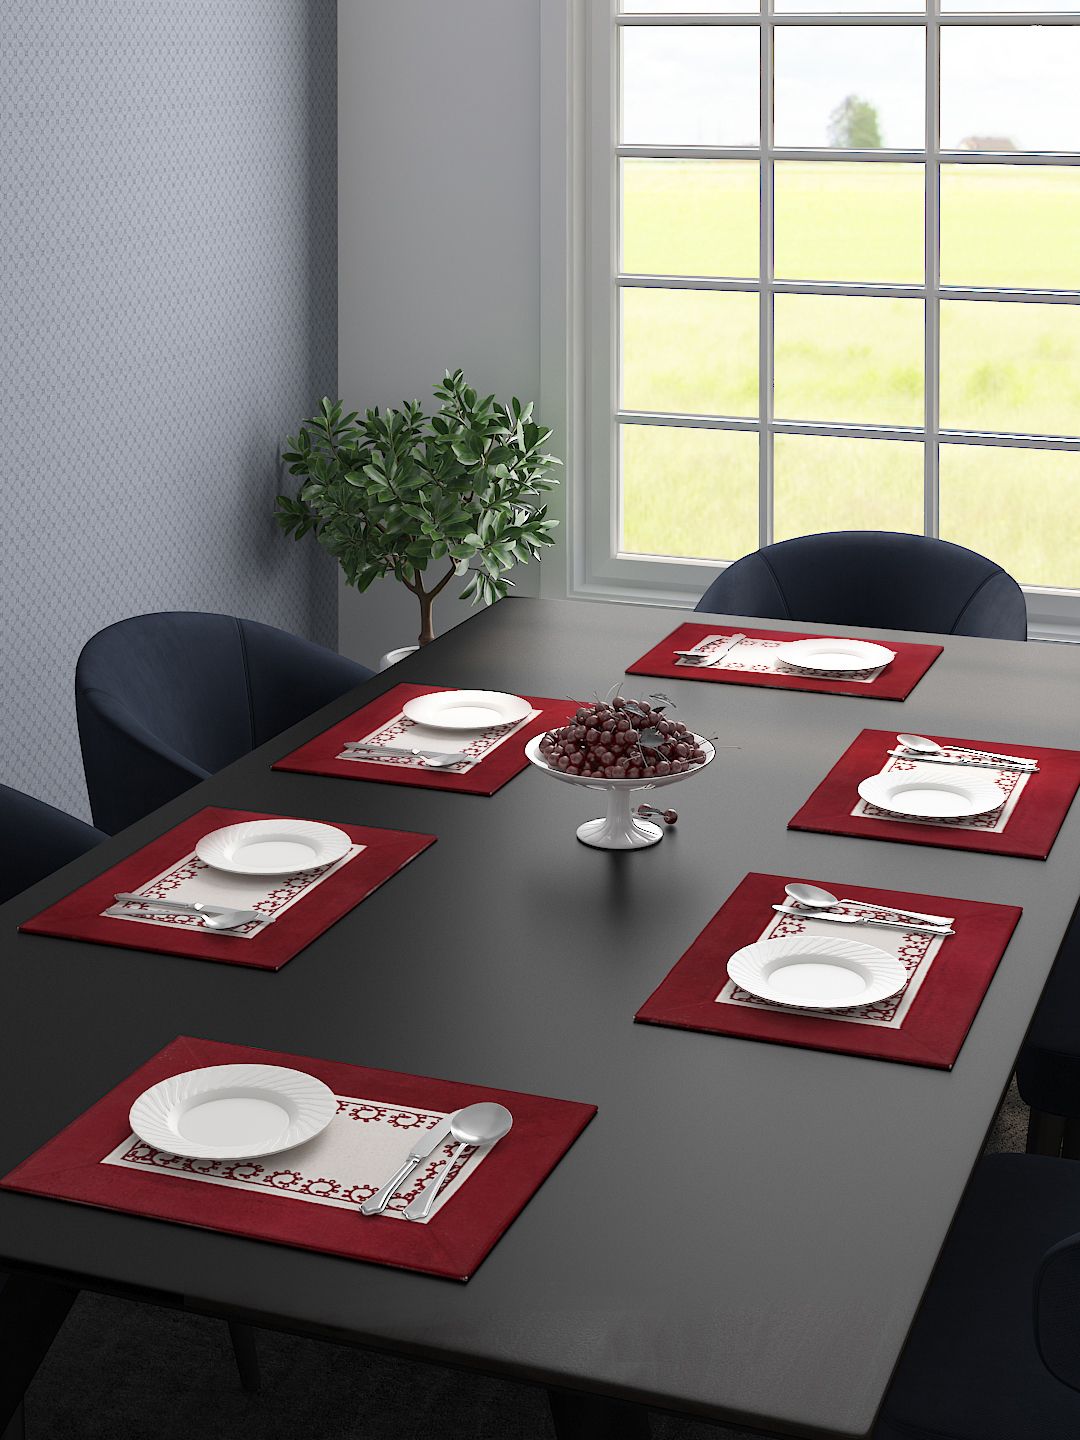 Saral Home Set Of 6 Printed Table Placemats Price in India